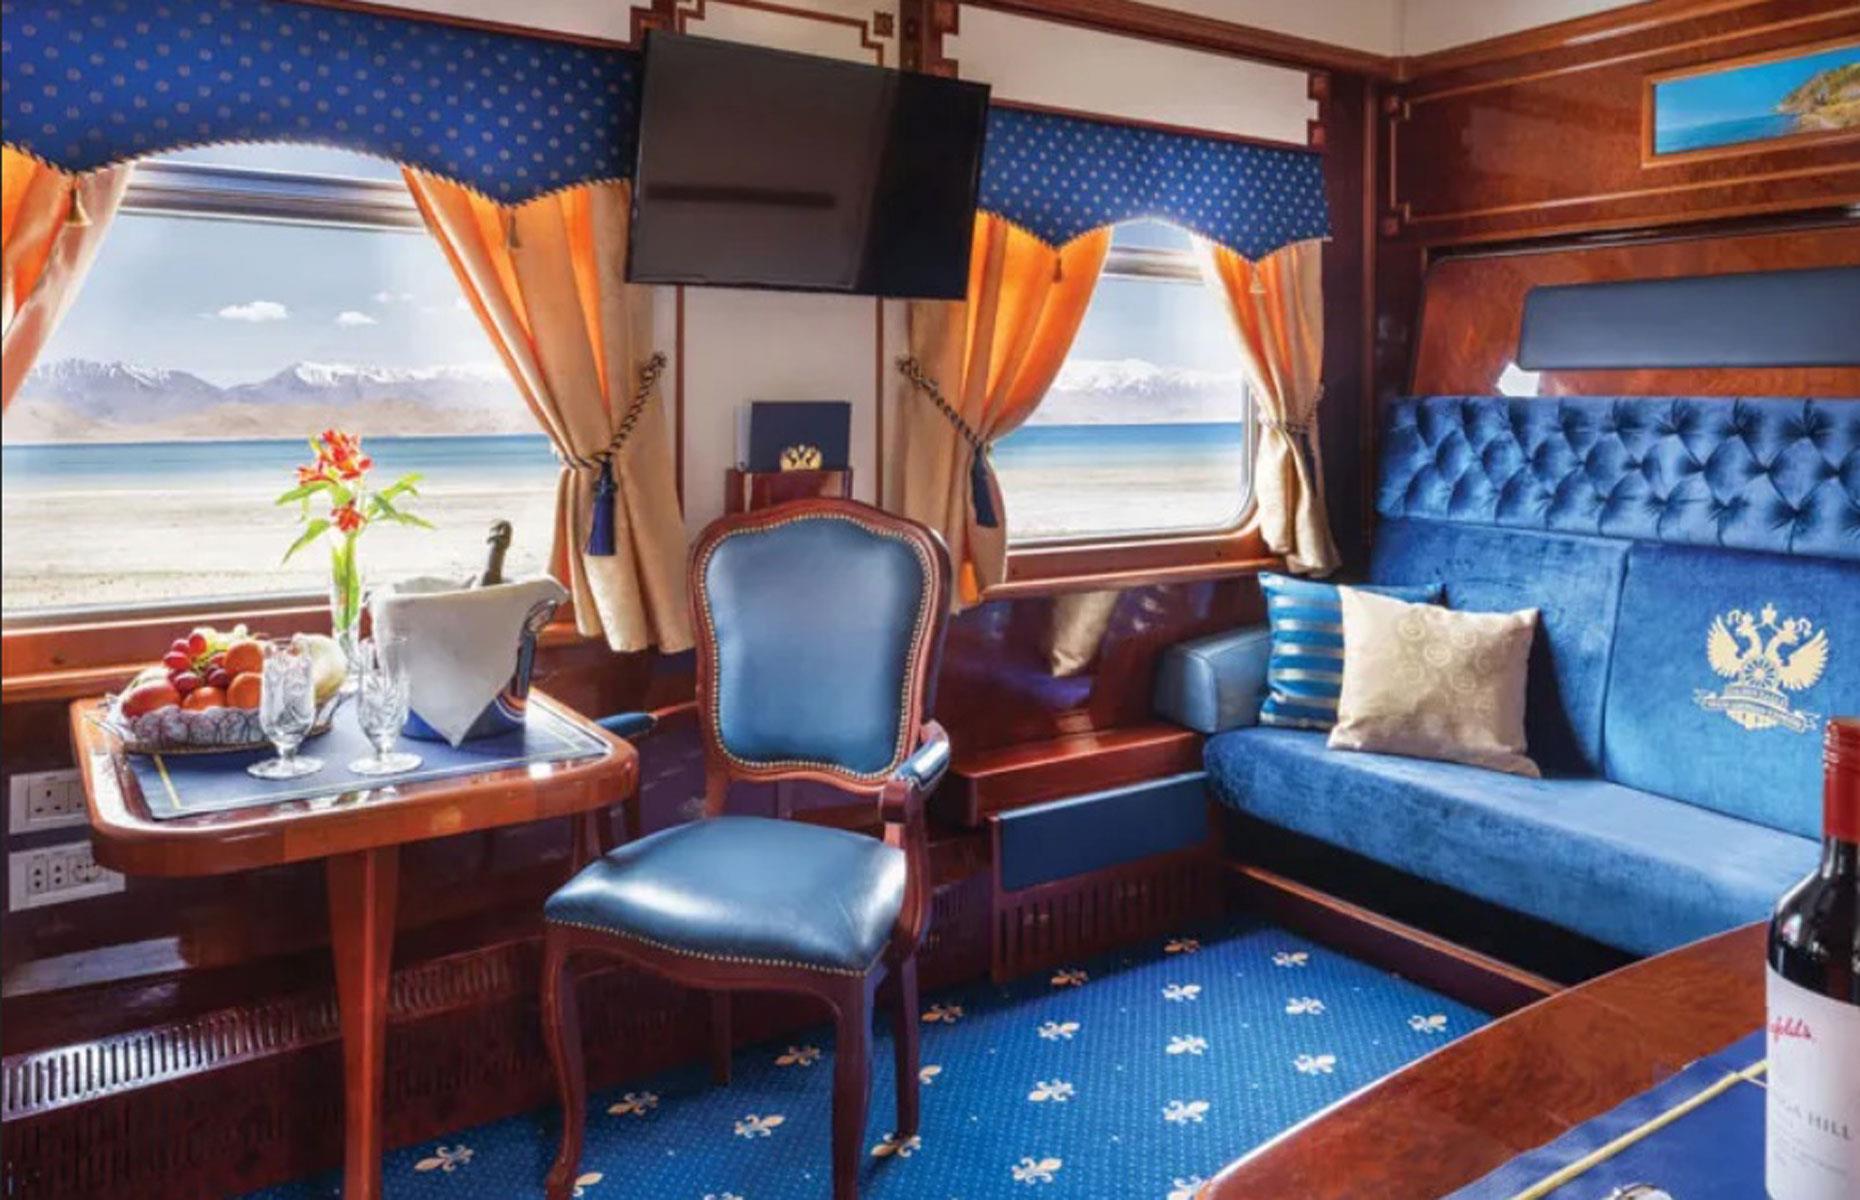 <p>The 14-day, 13-night Republic of the Silk Road tour, which travels through the "Five Stans" (Uzbekistan, Tajikistan, Kazakhstan, Kyrgyzstan, and Turkmenistan), is the train's most expensive trip.</p>  <p>For this journey, the Imperial Suite option – which offers passengers 120 square feet (11 square meters) of floor space, a king-sized bed, a lounge area, and a bathroom – is priced at $52,495 (£41,305) per person based on two sharing, or $103,895 (£81,749) for single occupancy. That's $4,038 (£3,177) and $7,992 (£6,288) respectively per night.</p>